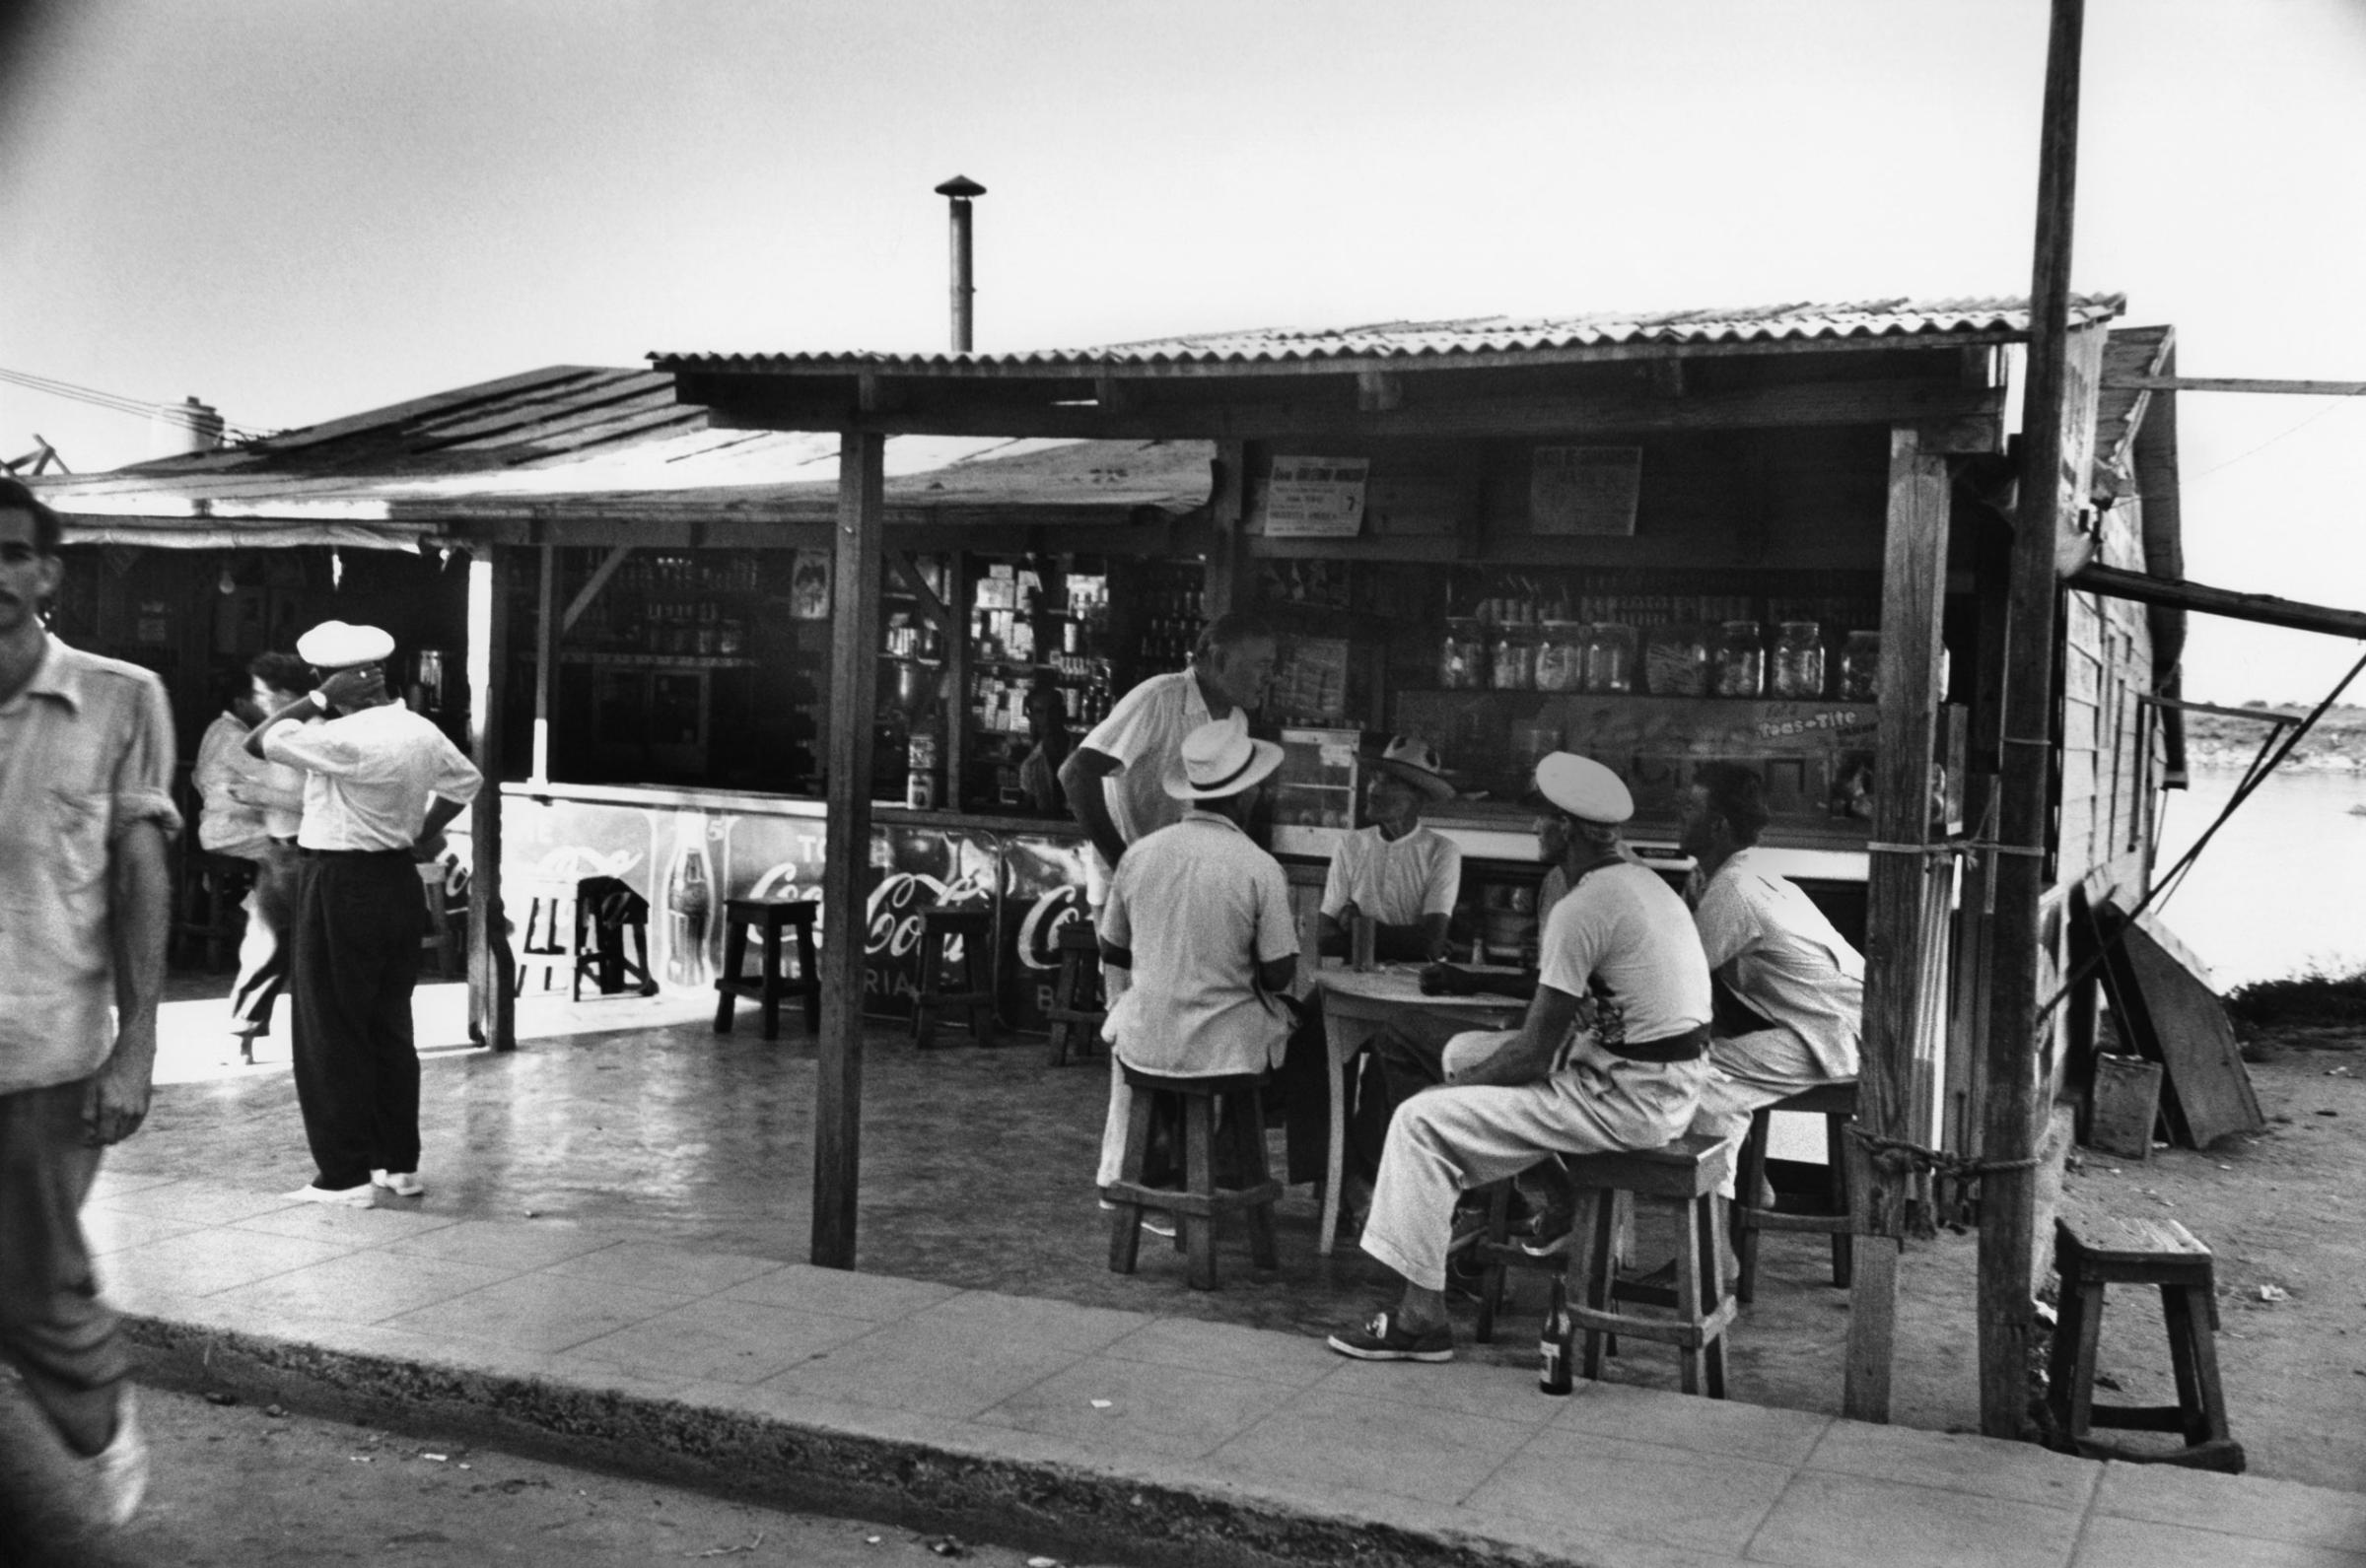 Ernest Hemingway chats with fellow patrons at a cafe he enjoyed frequenting in Cuba, 1952.